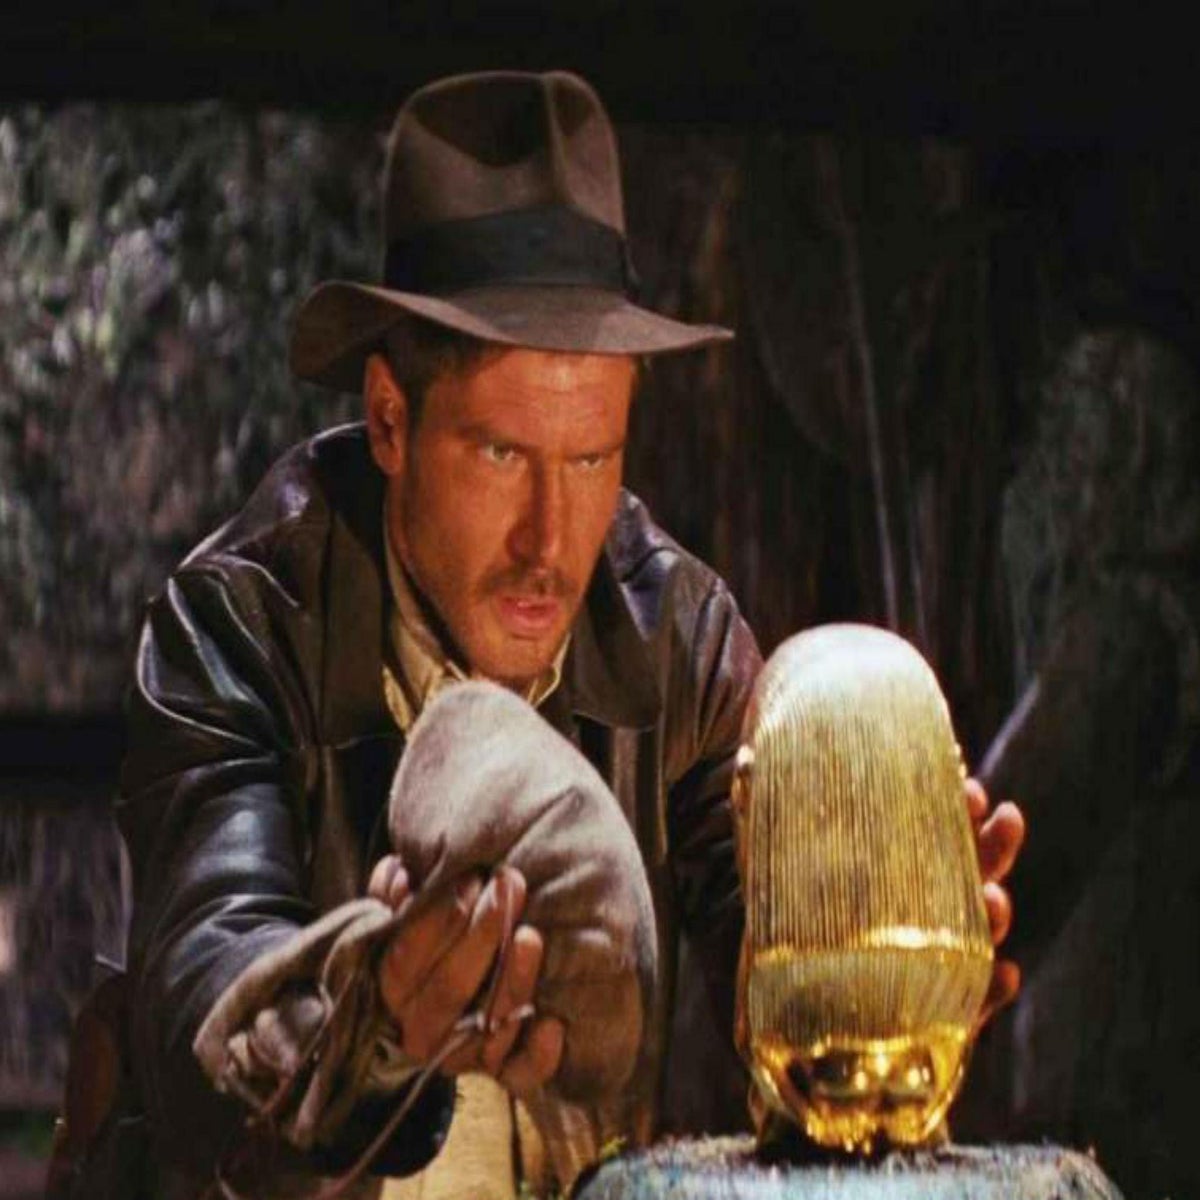 Harrison Ford says 'nobody' should play Indiana Jones after him